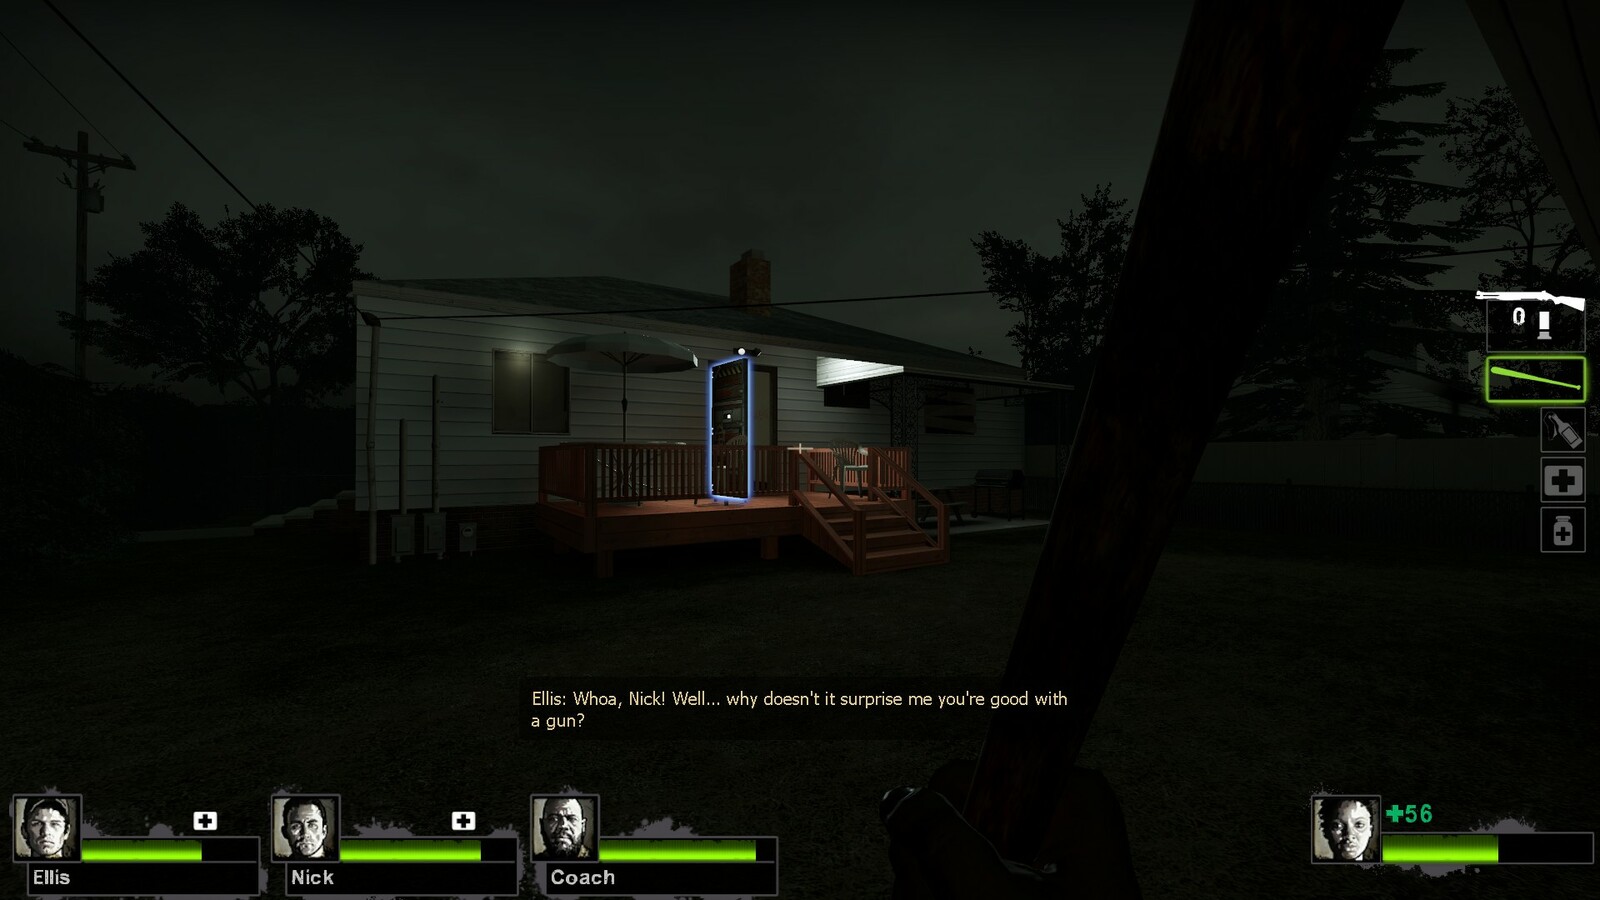 The last house players find is the safe house which will trigger the next level. Large glowing door helps player spot this easily in the dark as they're moving towards it.